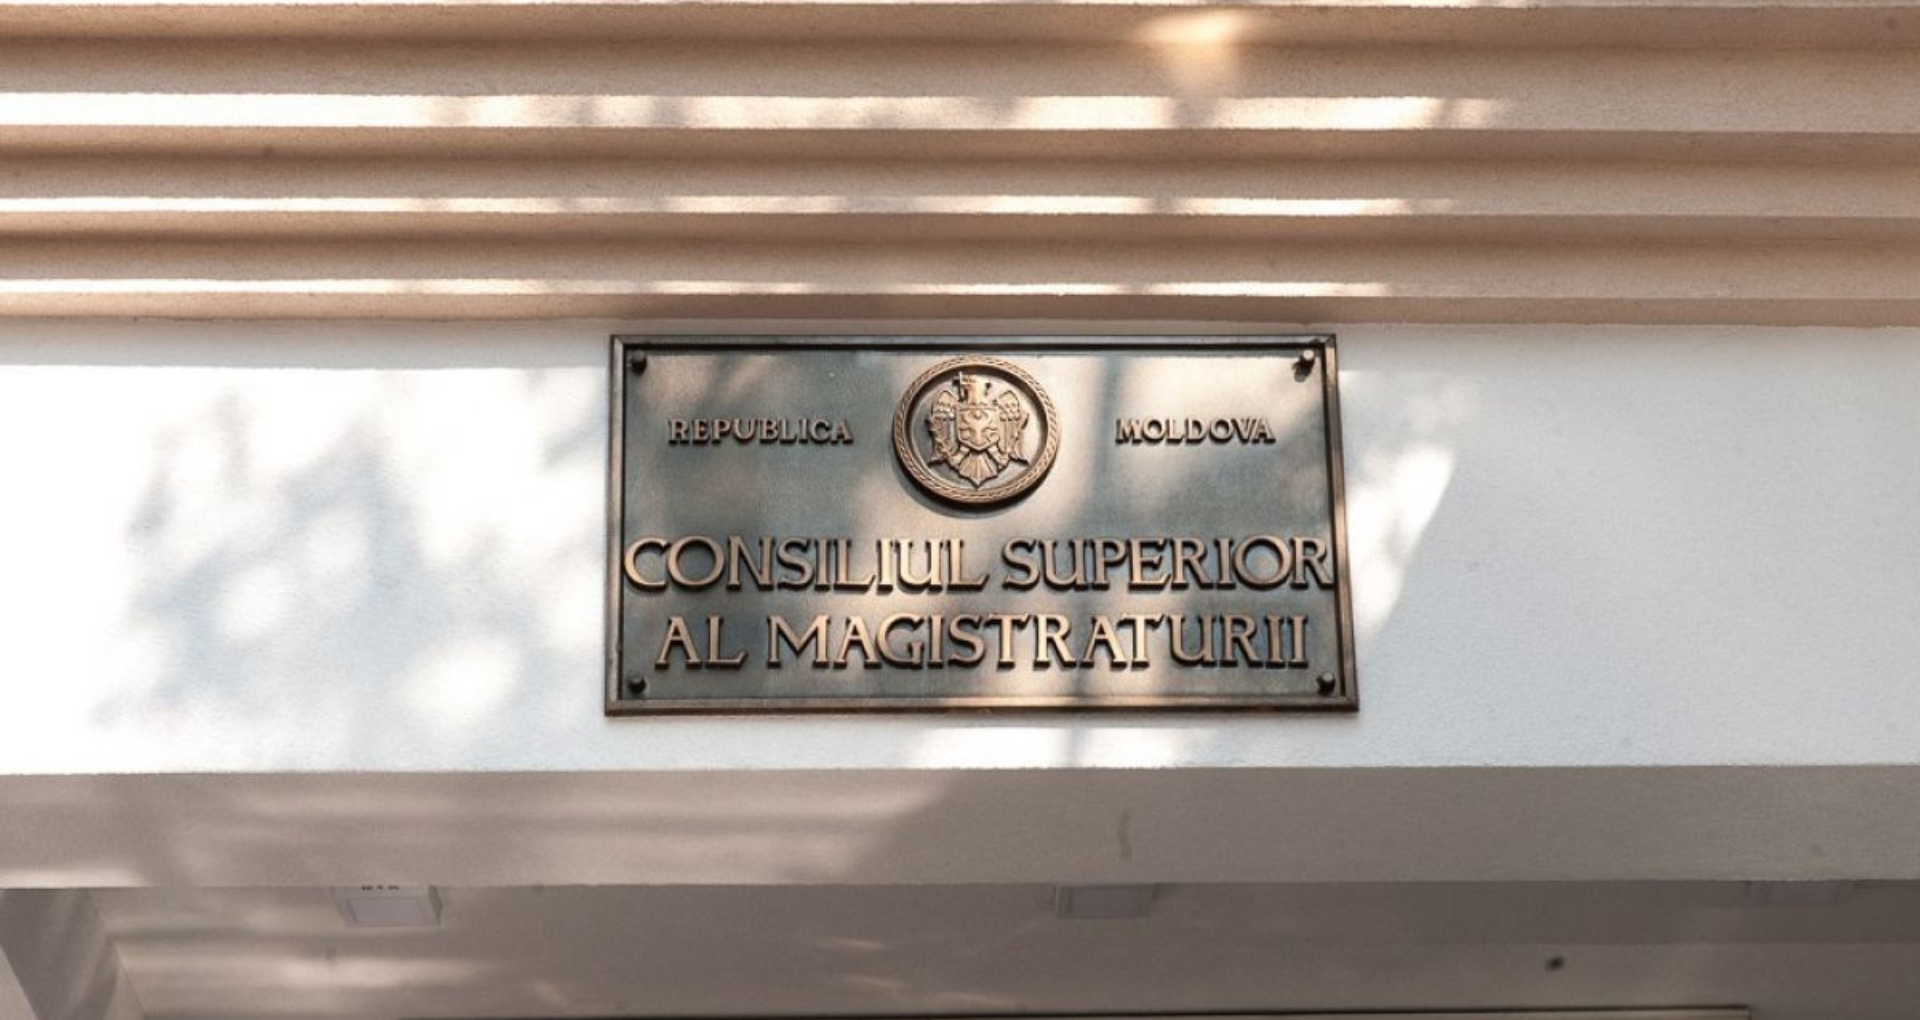 Seven non-judge candidates for positions in the Superior Council of Magistracy heard by the Pre-Vetting Commission